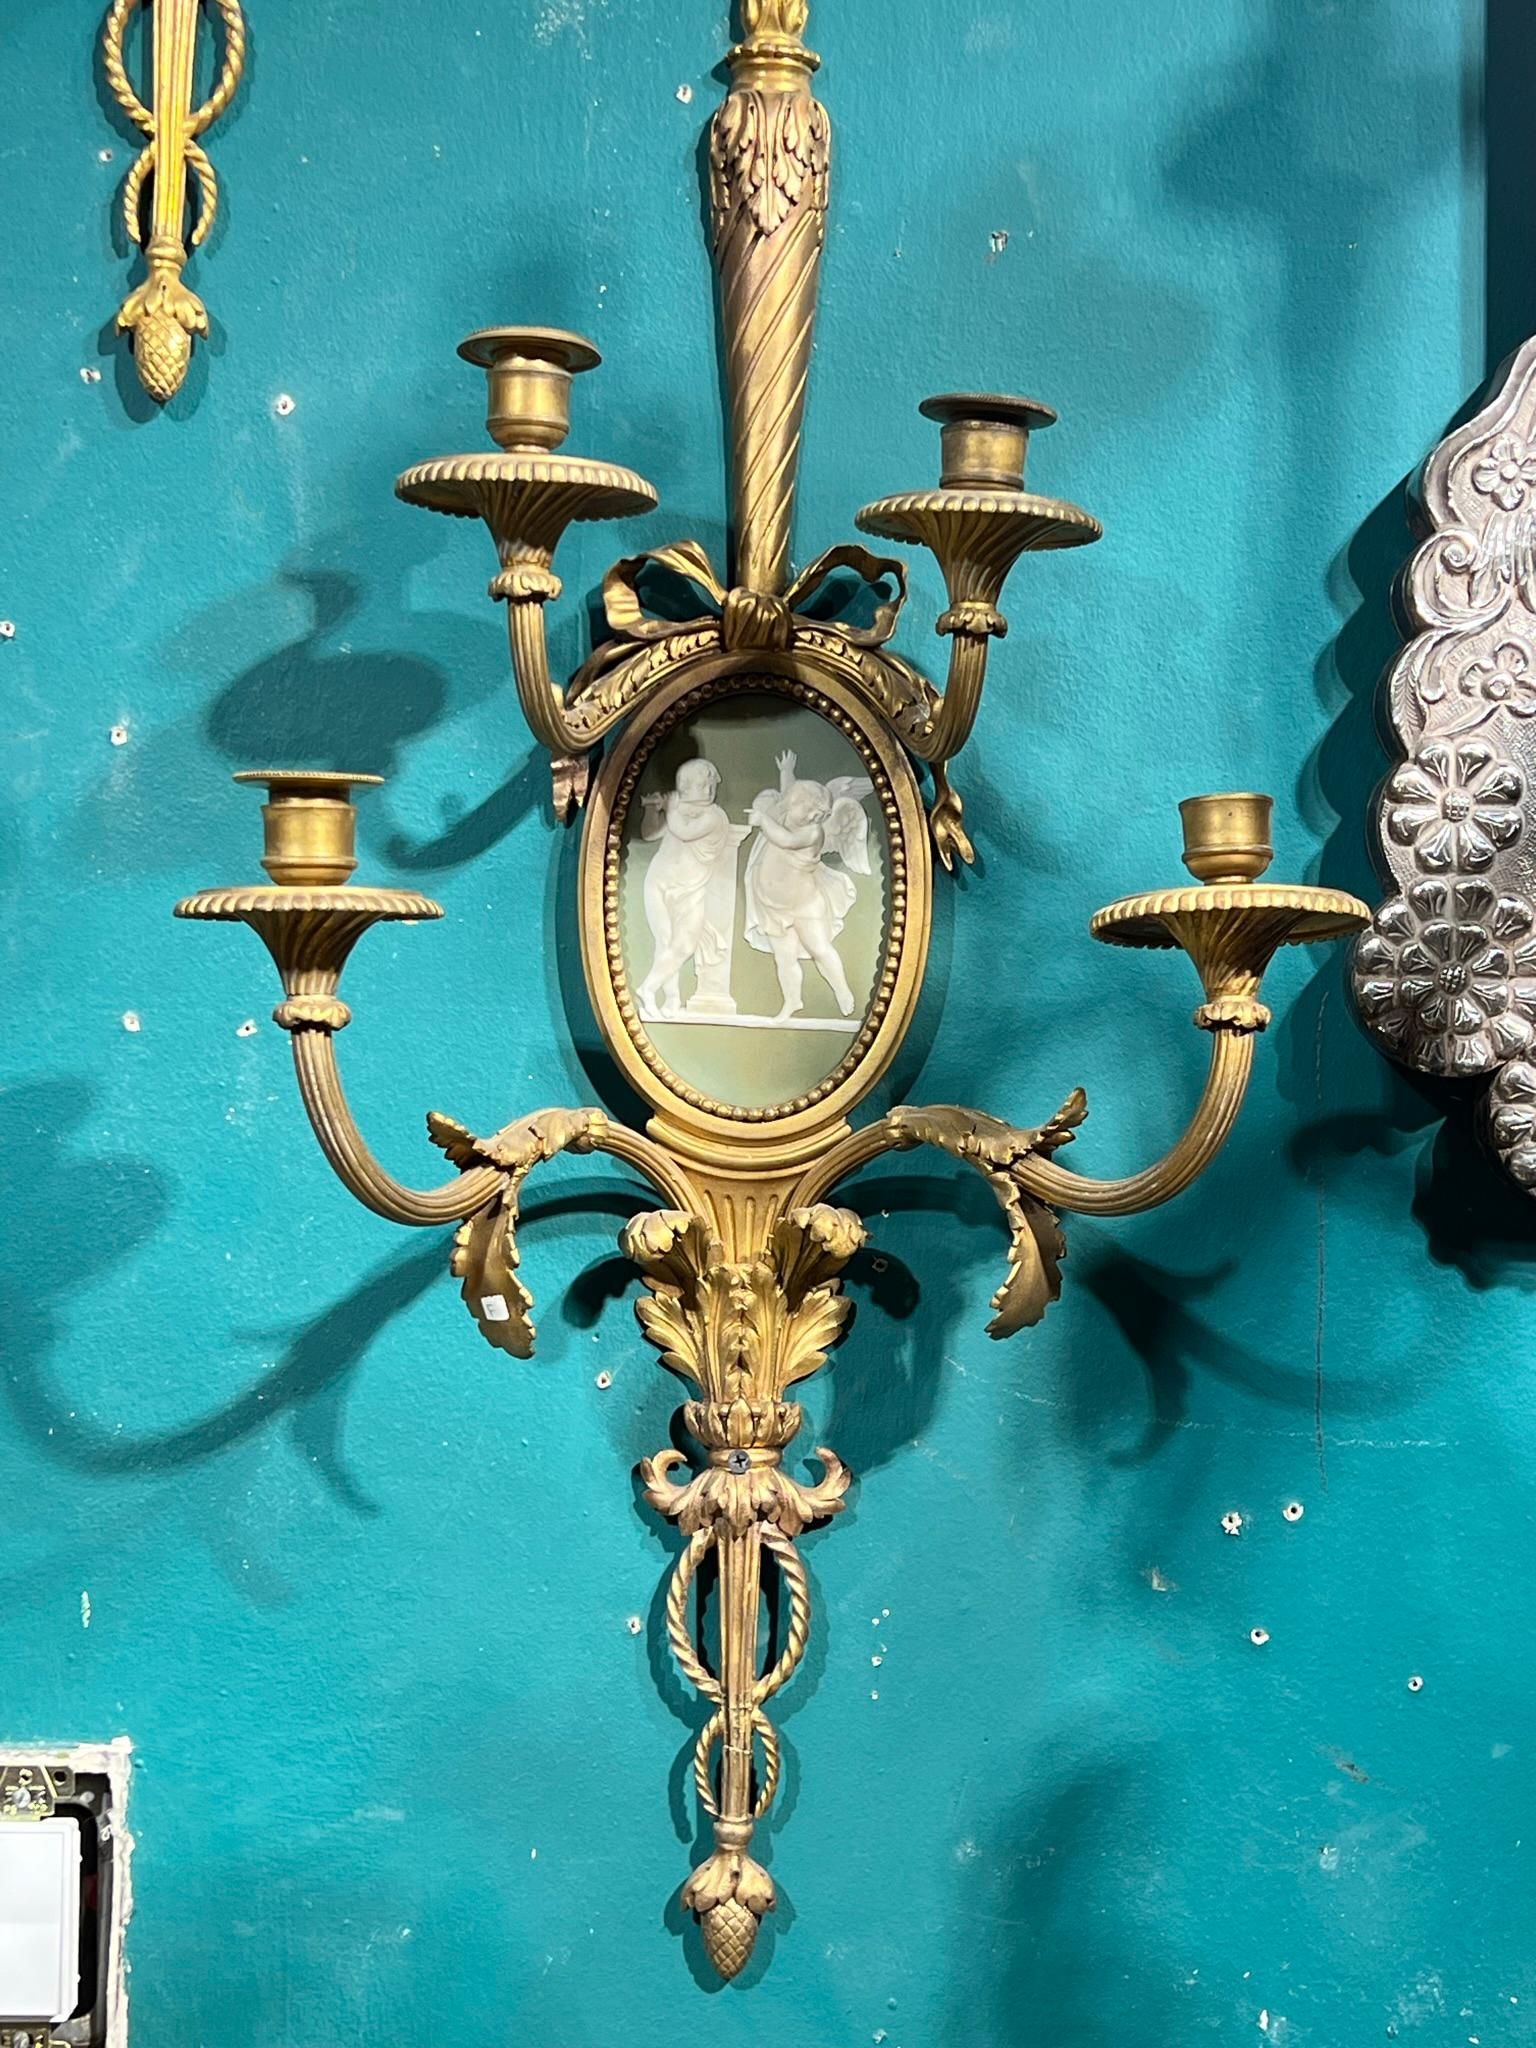 Pair of antique (19th century) neoclassical Louis XVI style gilt bronze wall lights with oval shaped white and forest green jasperware porcelain plaques depicting putti and a dancing muse, possibly from Wedgwood.